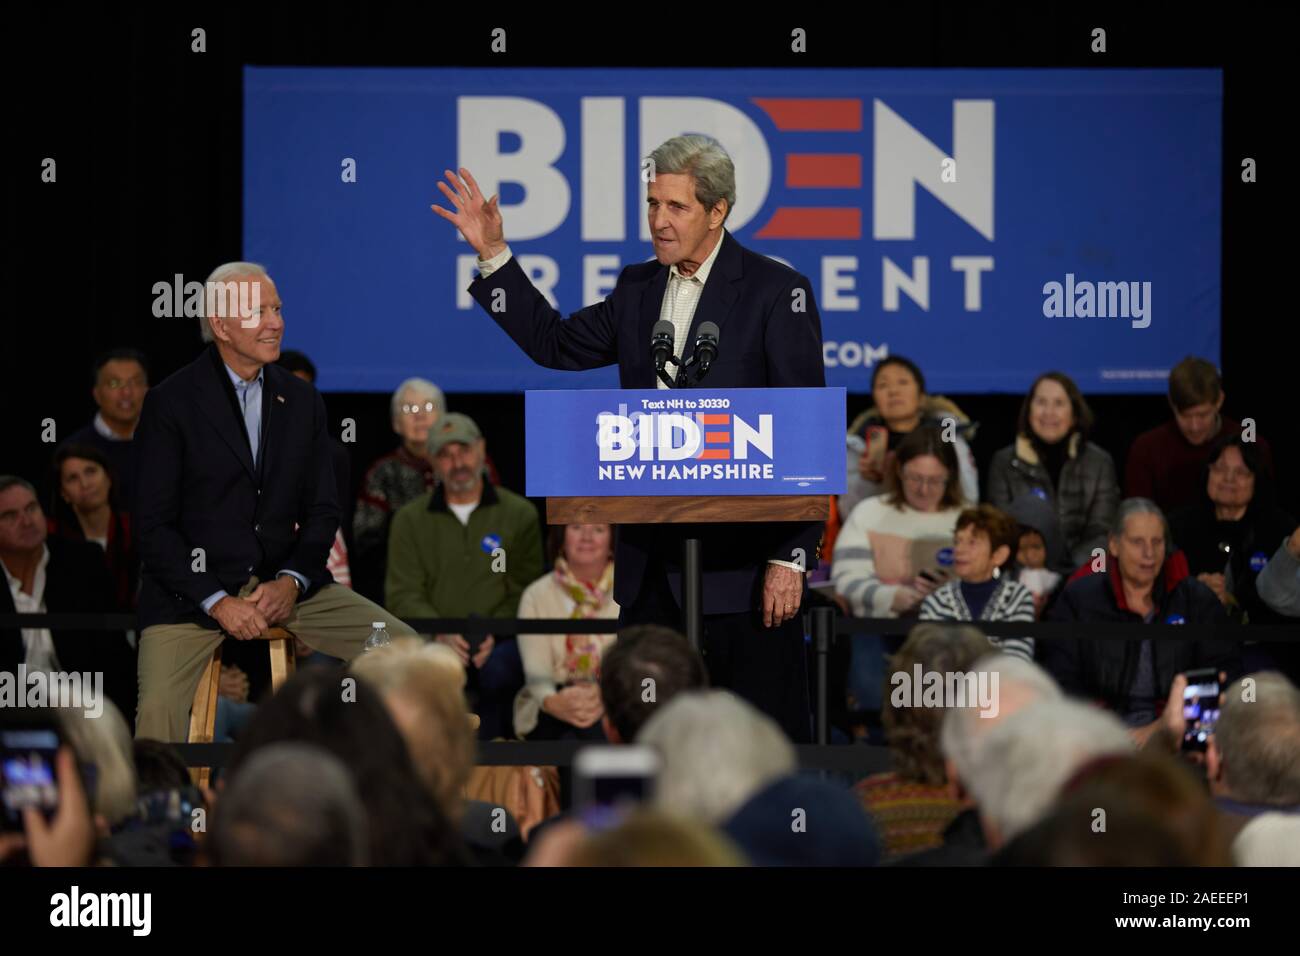 Hampton, New Hampshire, USA. 8th Dec, 2019. Former Vice President Joe Biden held an event with Senator John Kerry for supporters in Hampton, New Hampshire on December 8, 2019. Biden is campaigning for the 2020 Democratic Presidential nominee. John Kerry speaks in support of Joe Biden. Credit: Allison Dinner/ZUMA Wire/Alamy Live News Stock Photo